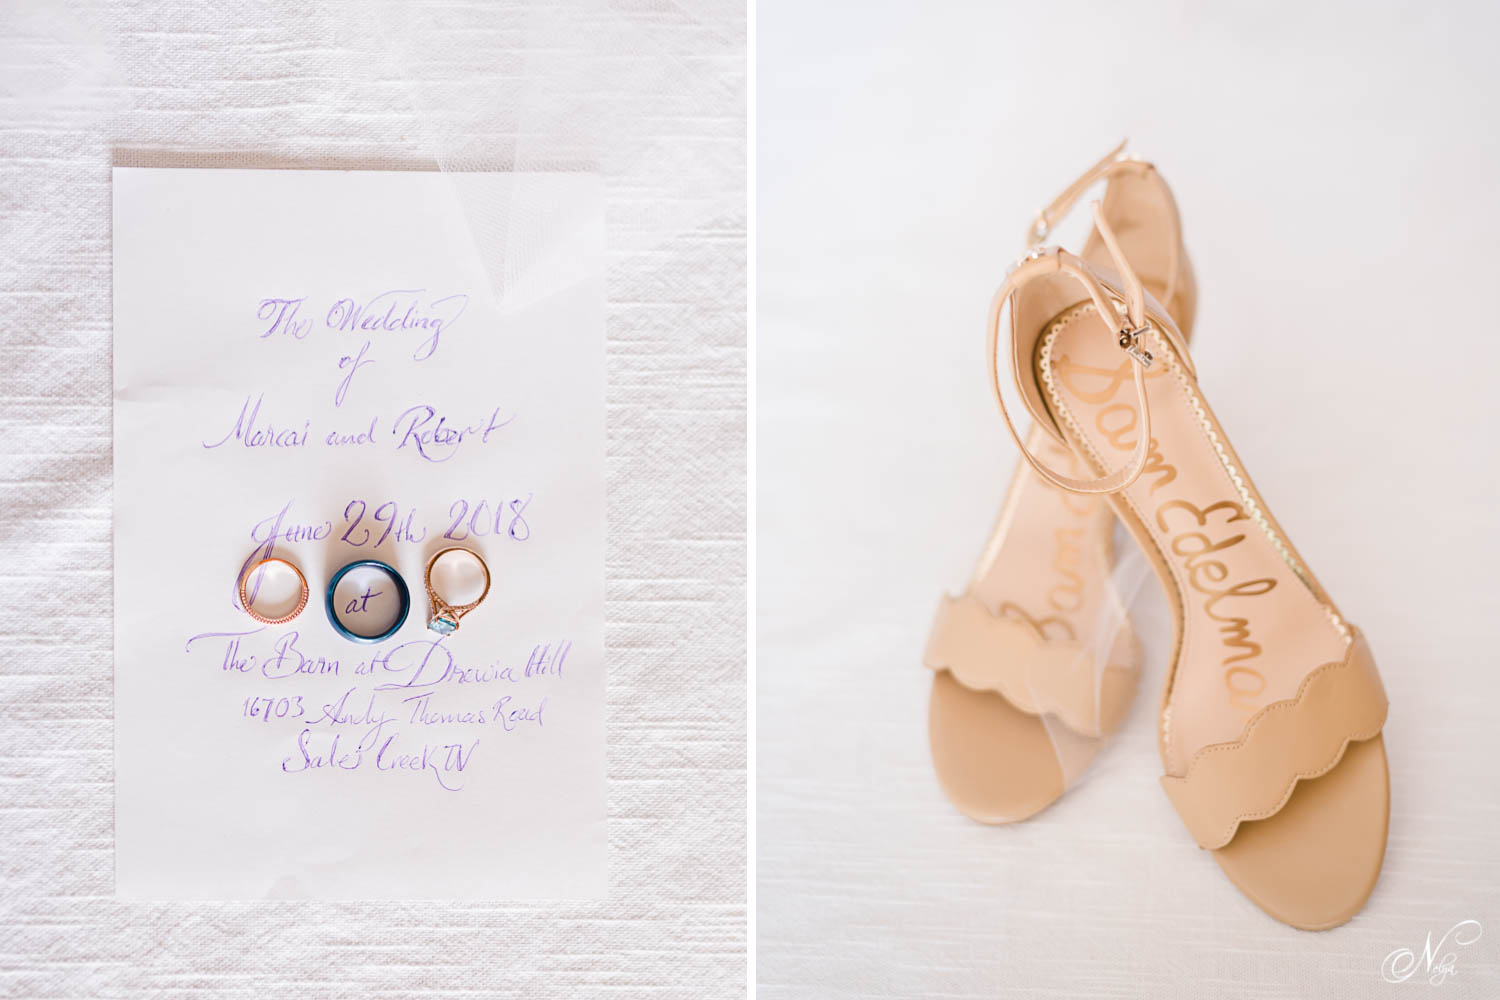 rose gold wedding ring and mans blue wedding band. tan wedding shoes on white background